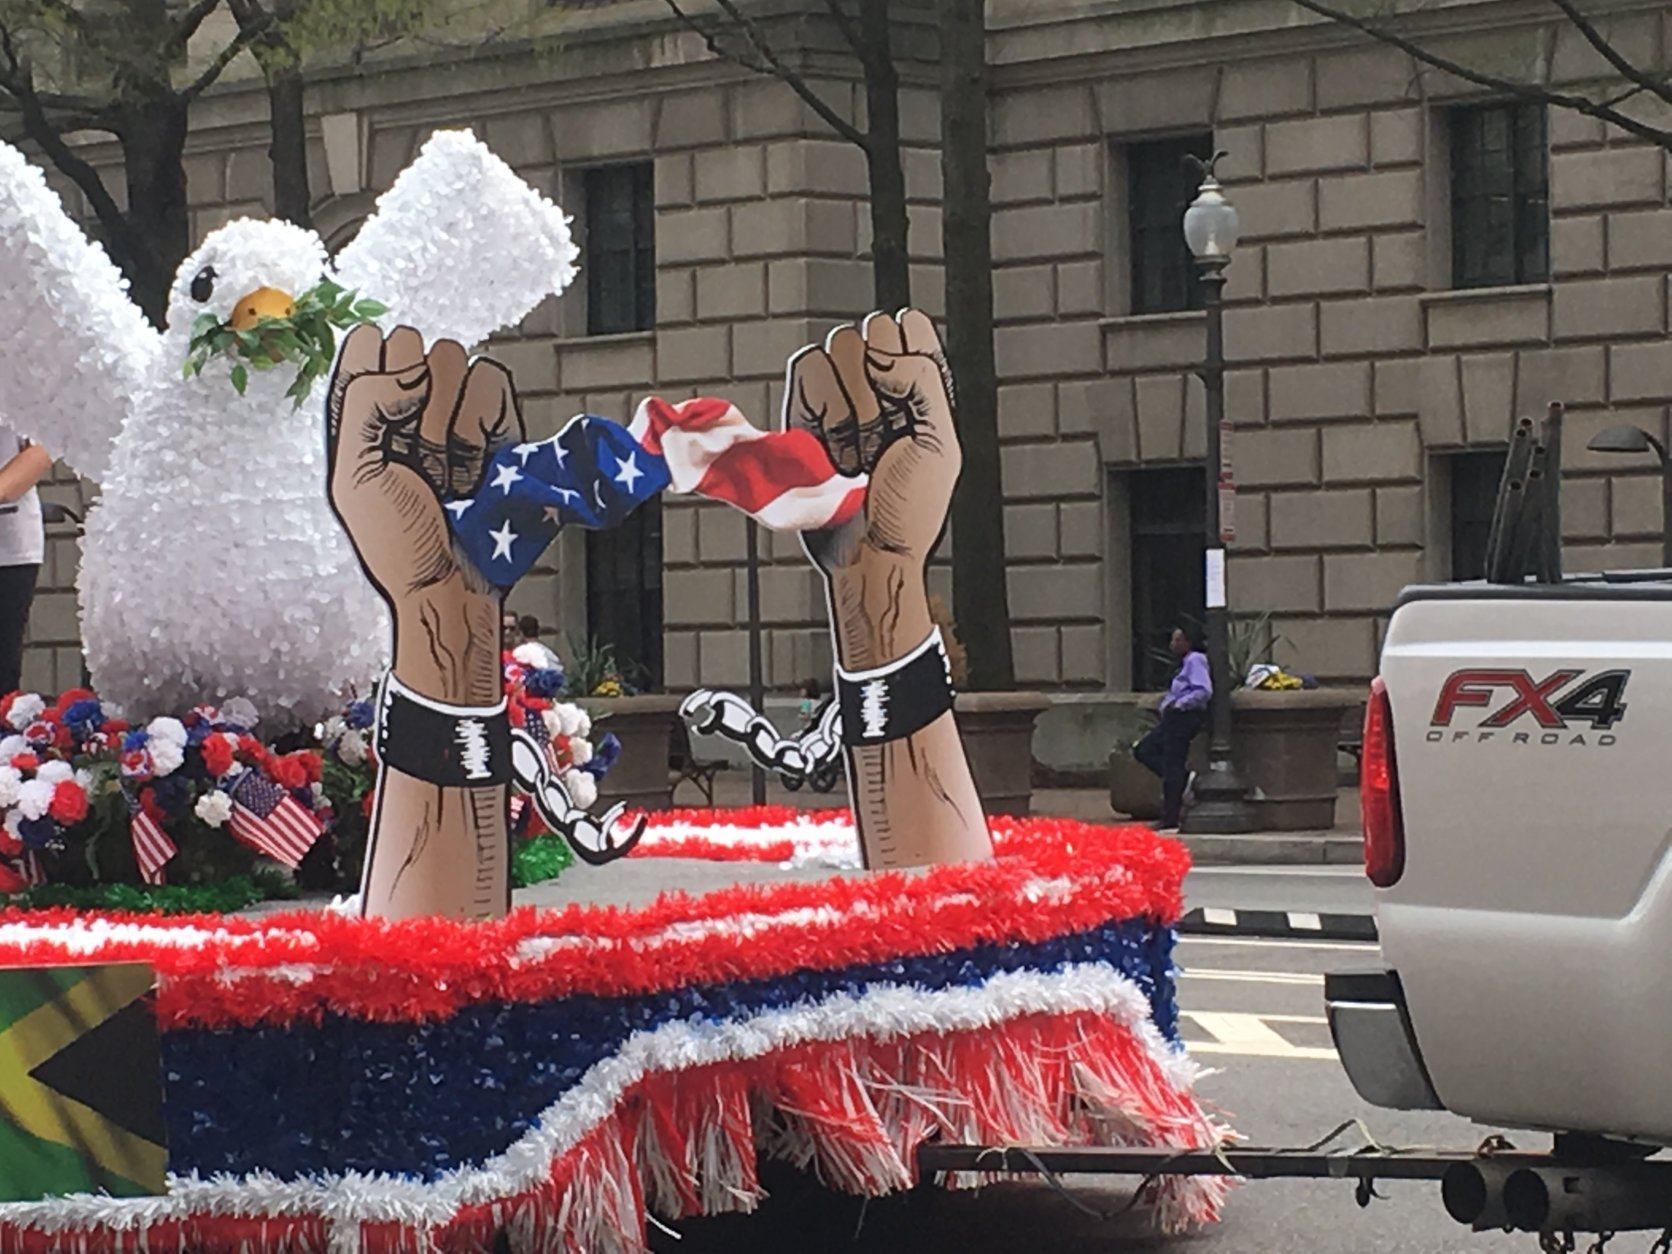 A float glides along during the Emancipation Day Parade in D.C. on Saturday, April 13, 2019. (WTOP/Rick Massimo)